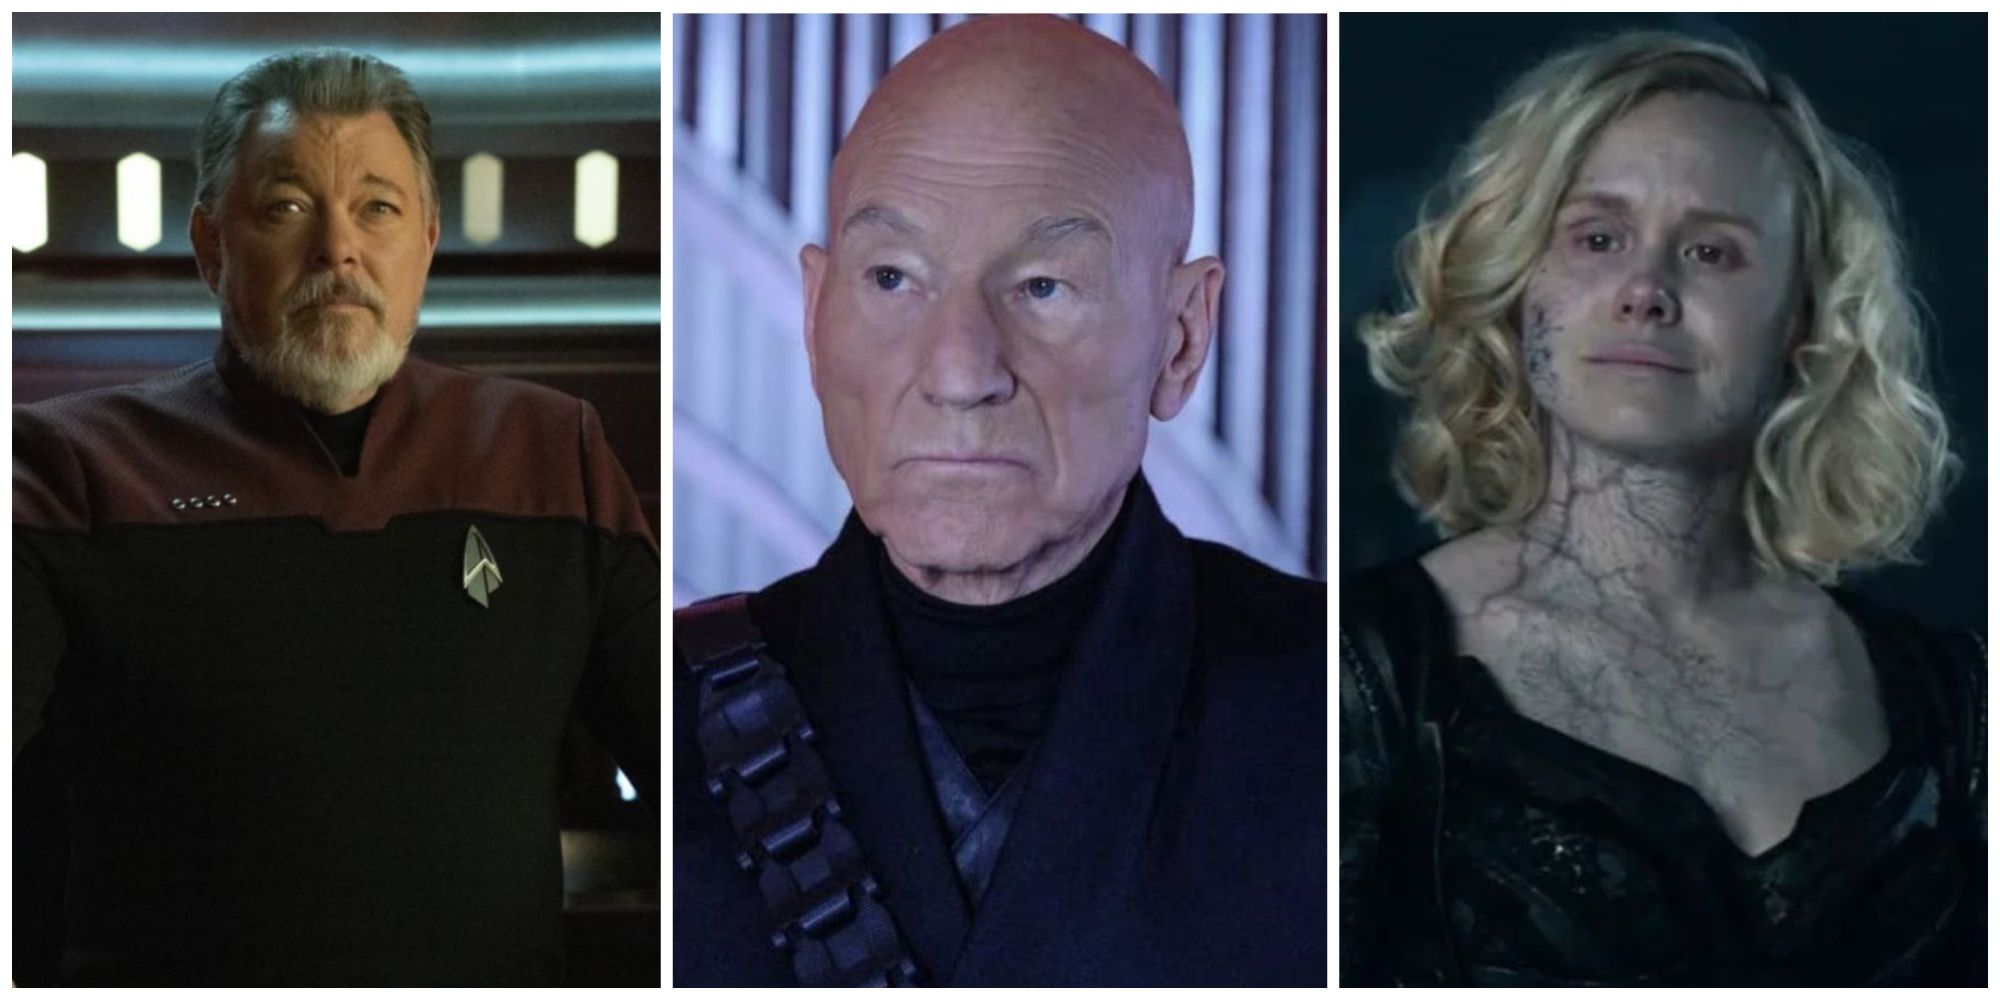 A collage showing Picard, Riker, and Jurati in Star Trek: Picard.